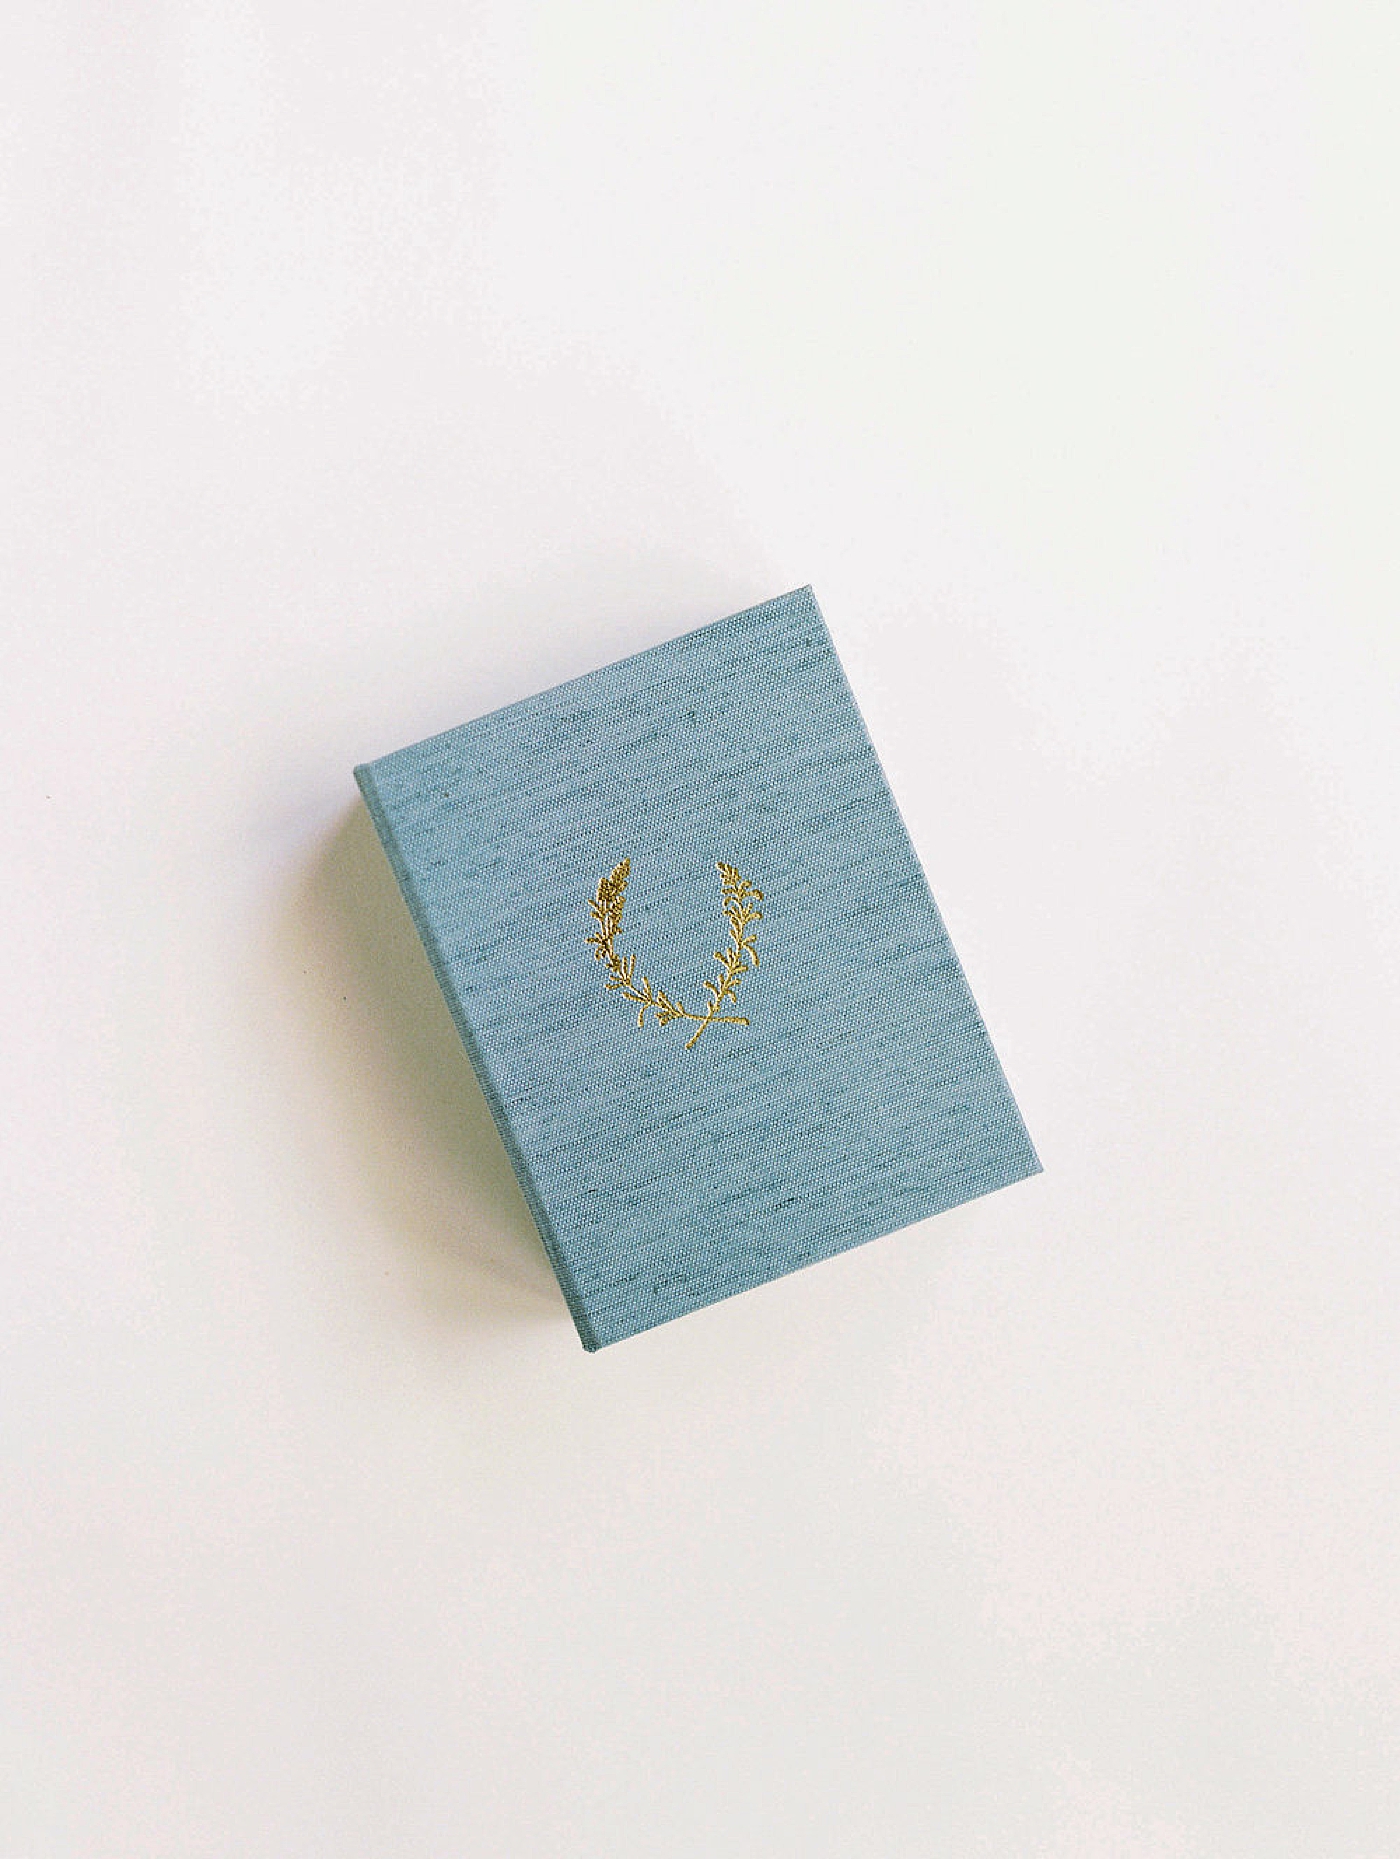 Blue linen wedding album with gold embossed detail | Fine Art Wedding Albums from Diane Sotero 